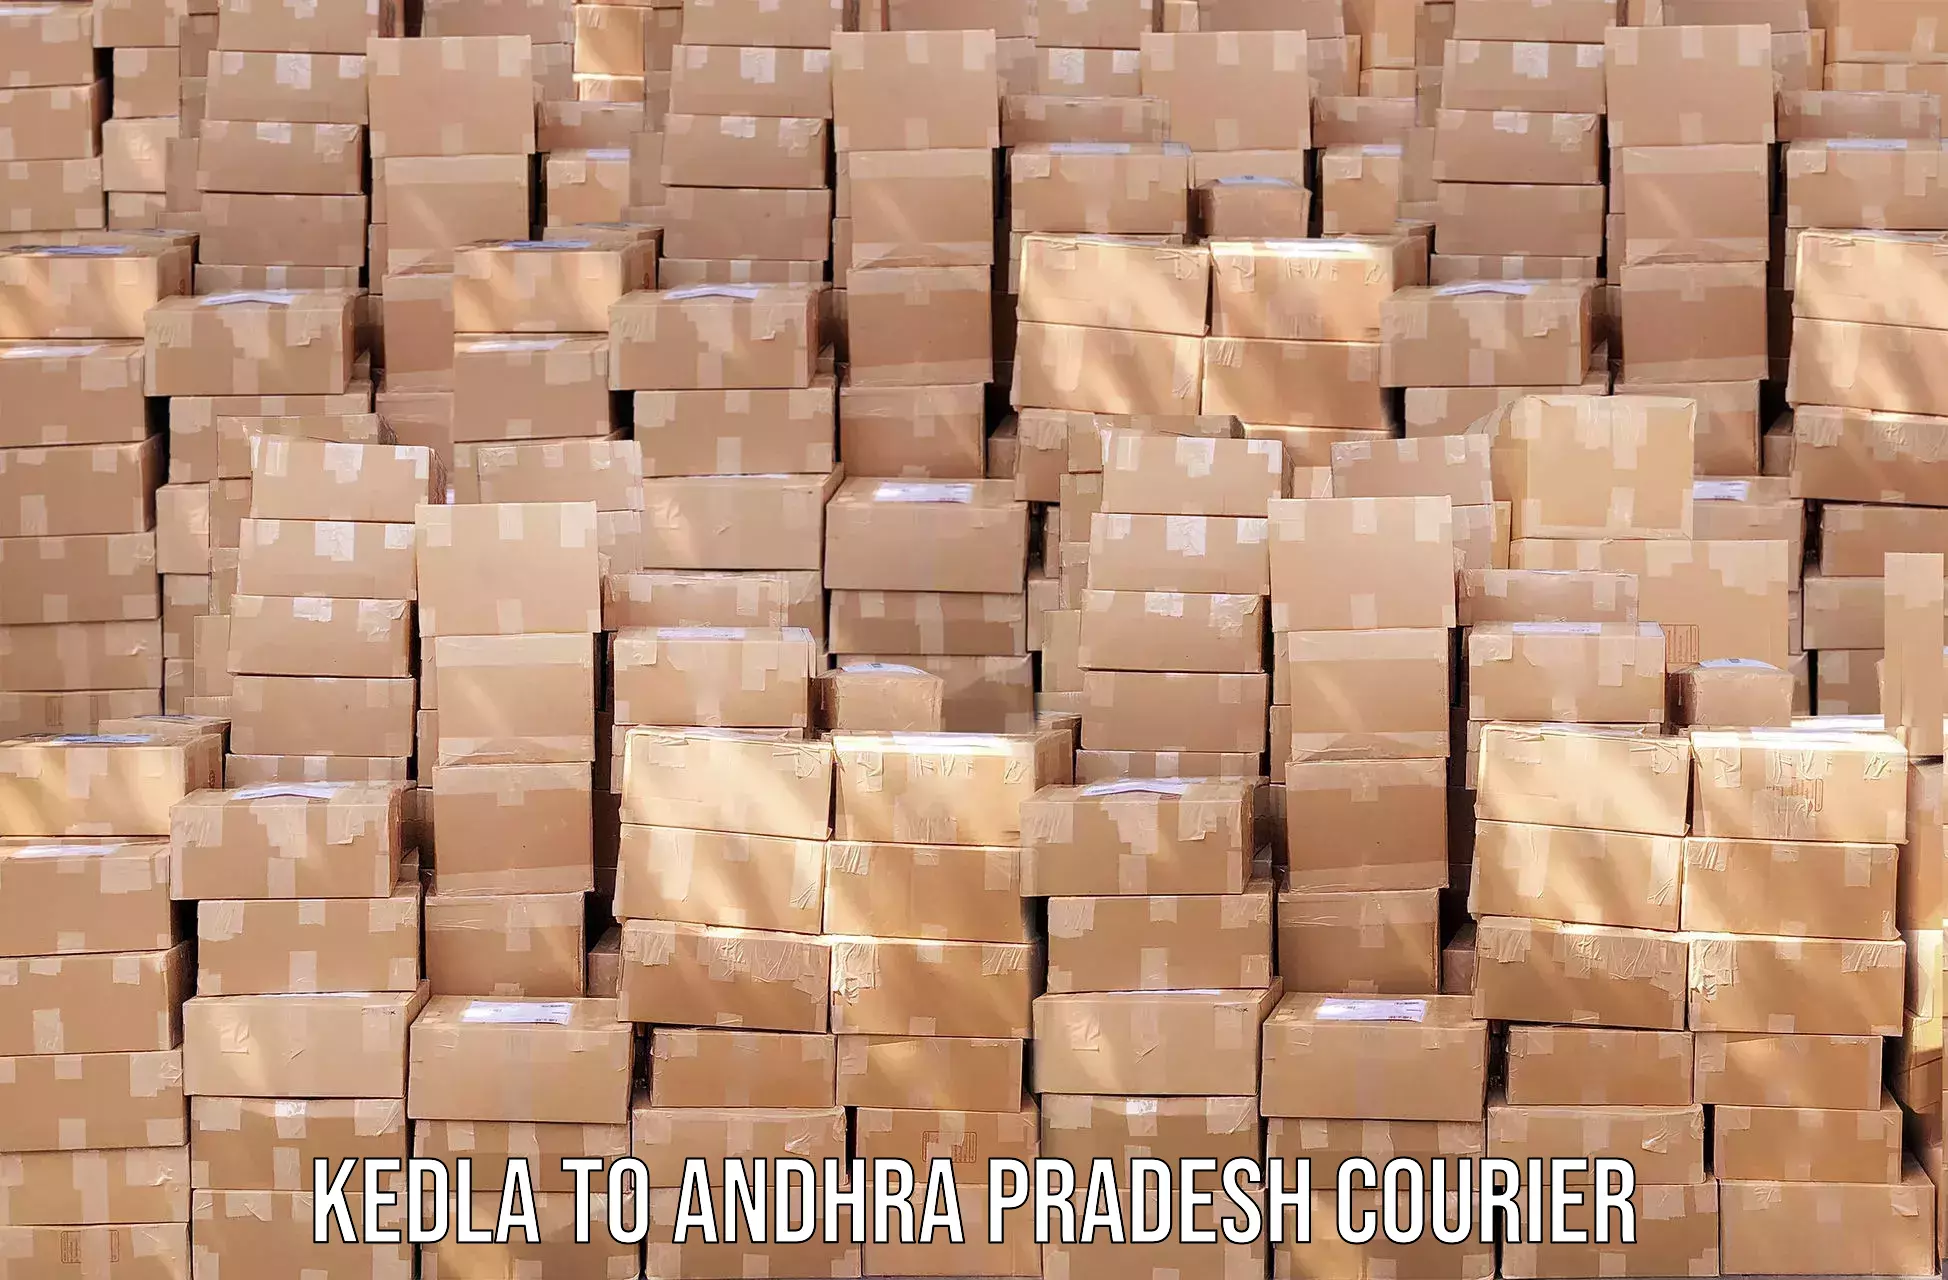 Reliable courier services Kedla to Andhra Pradesh